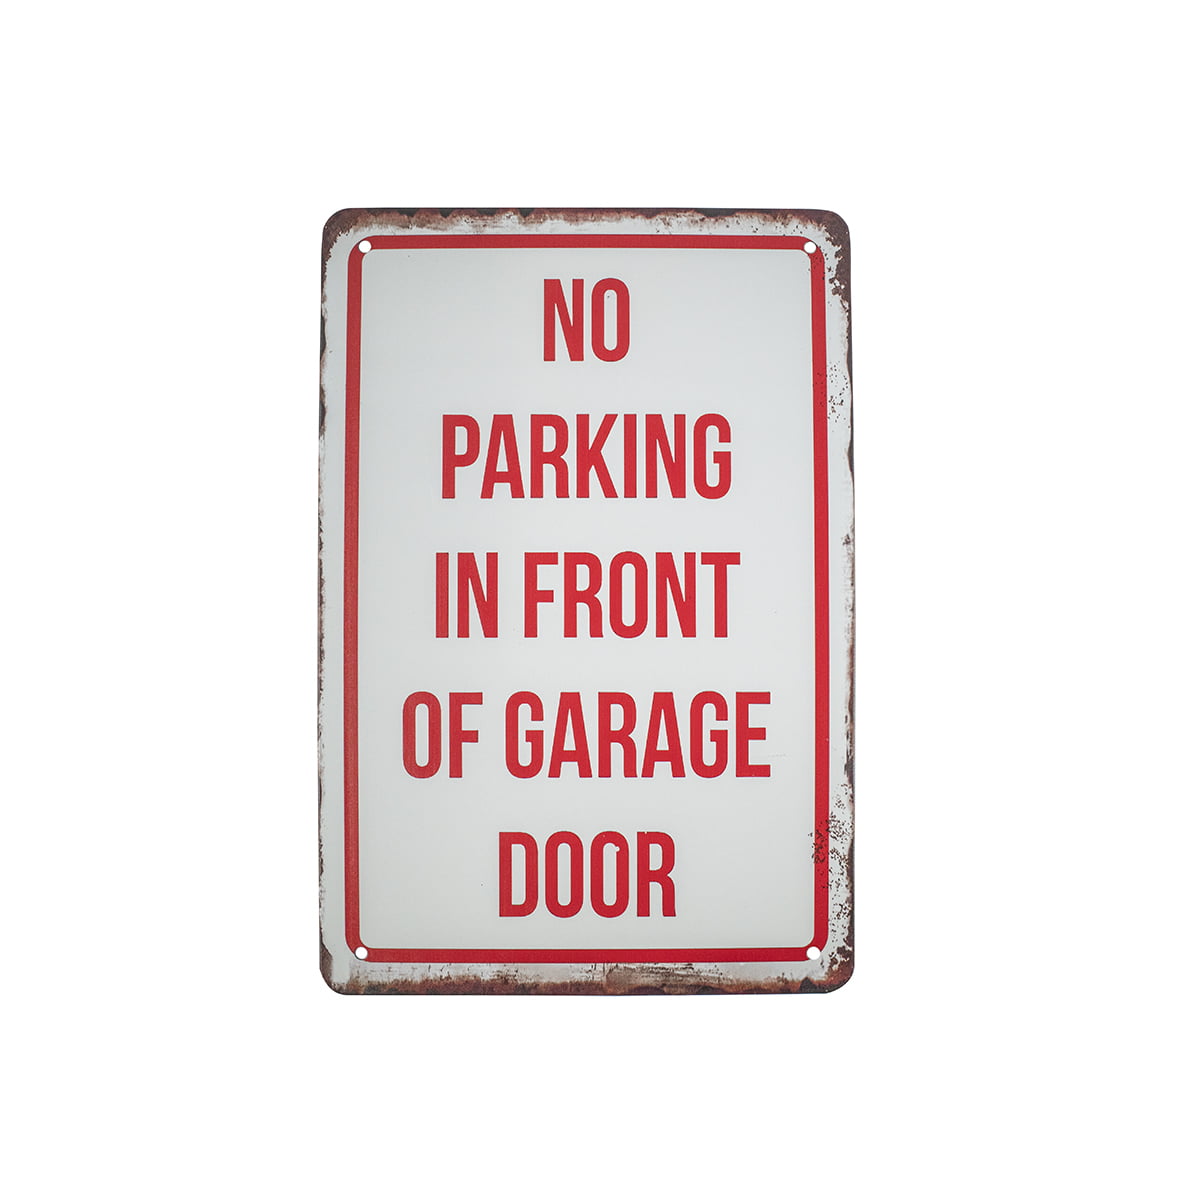 METAL CAUTION WARNING DO NOT PARK HERE PARKING SPACE HOUSE DRIVE GARAGE CAR SIGN 